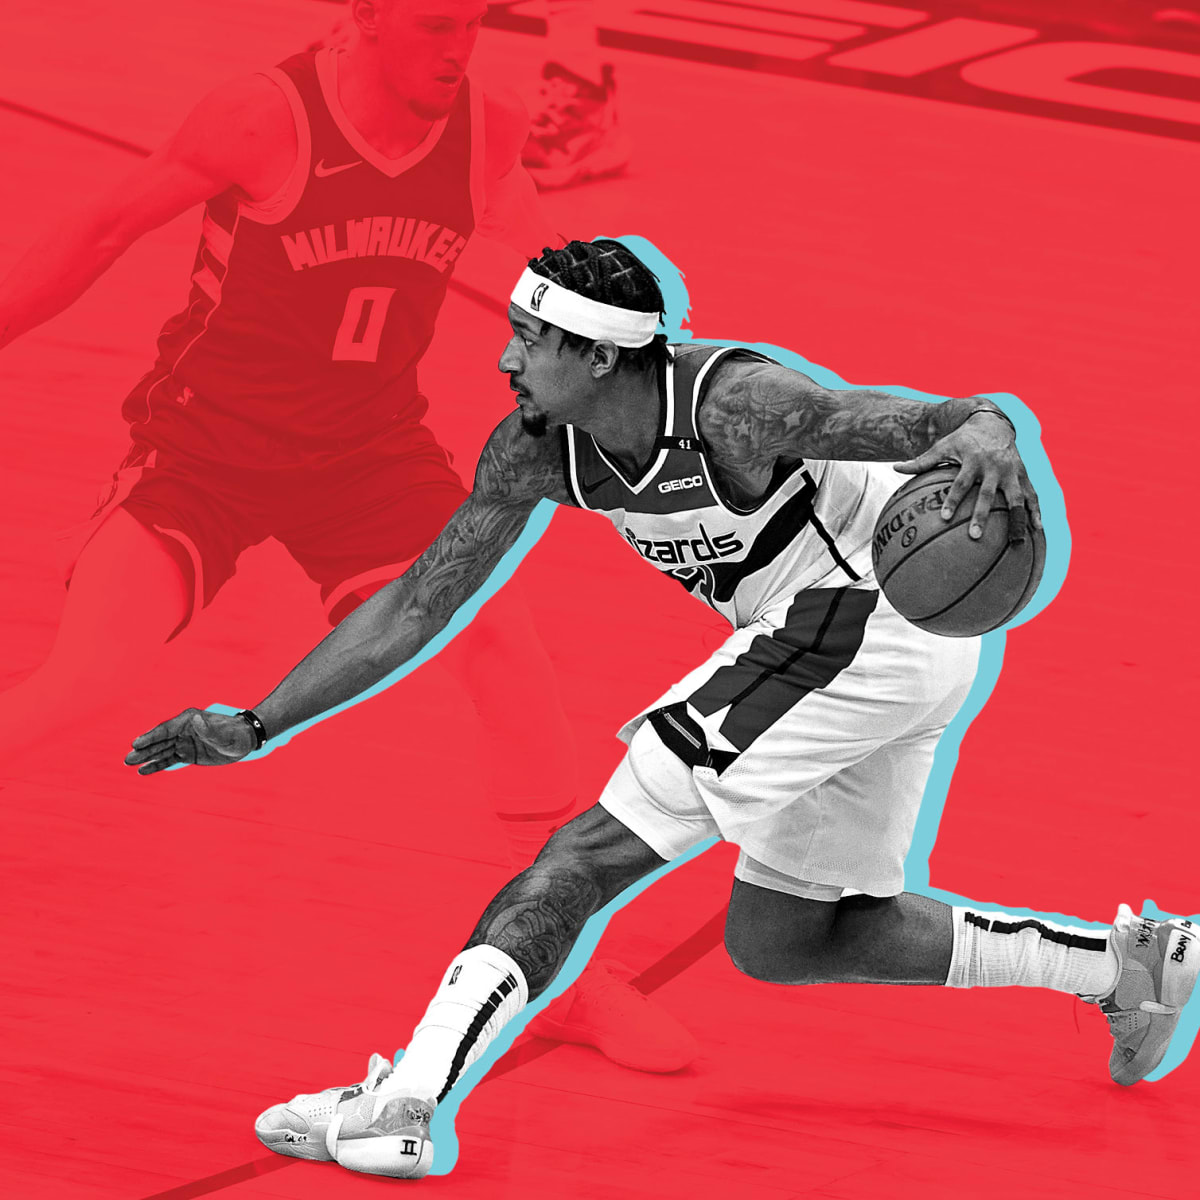 Bradley Beal Net Worth 2023: What Is The NBA Star Worth?